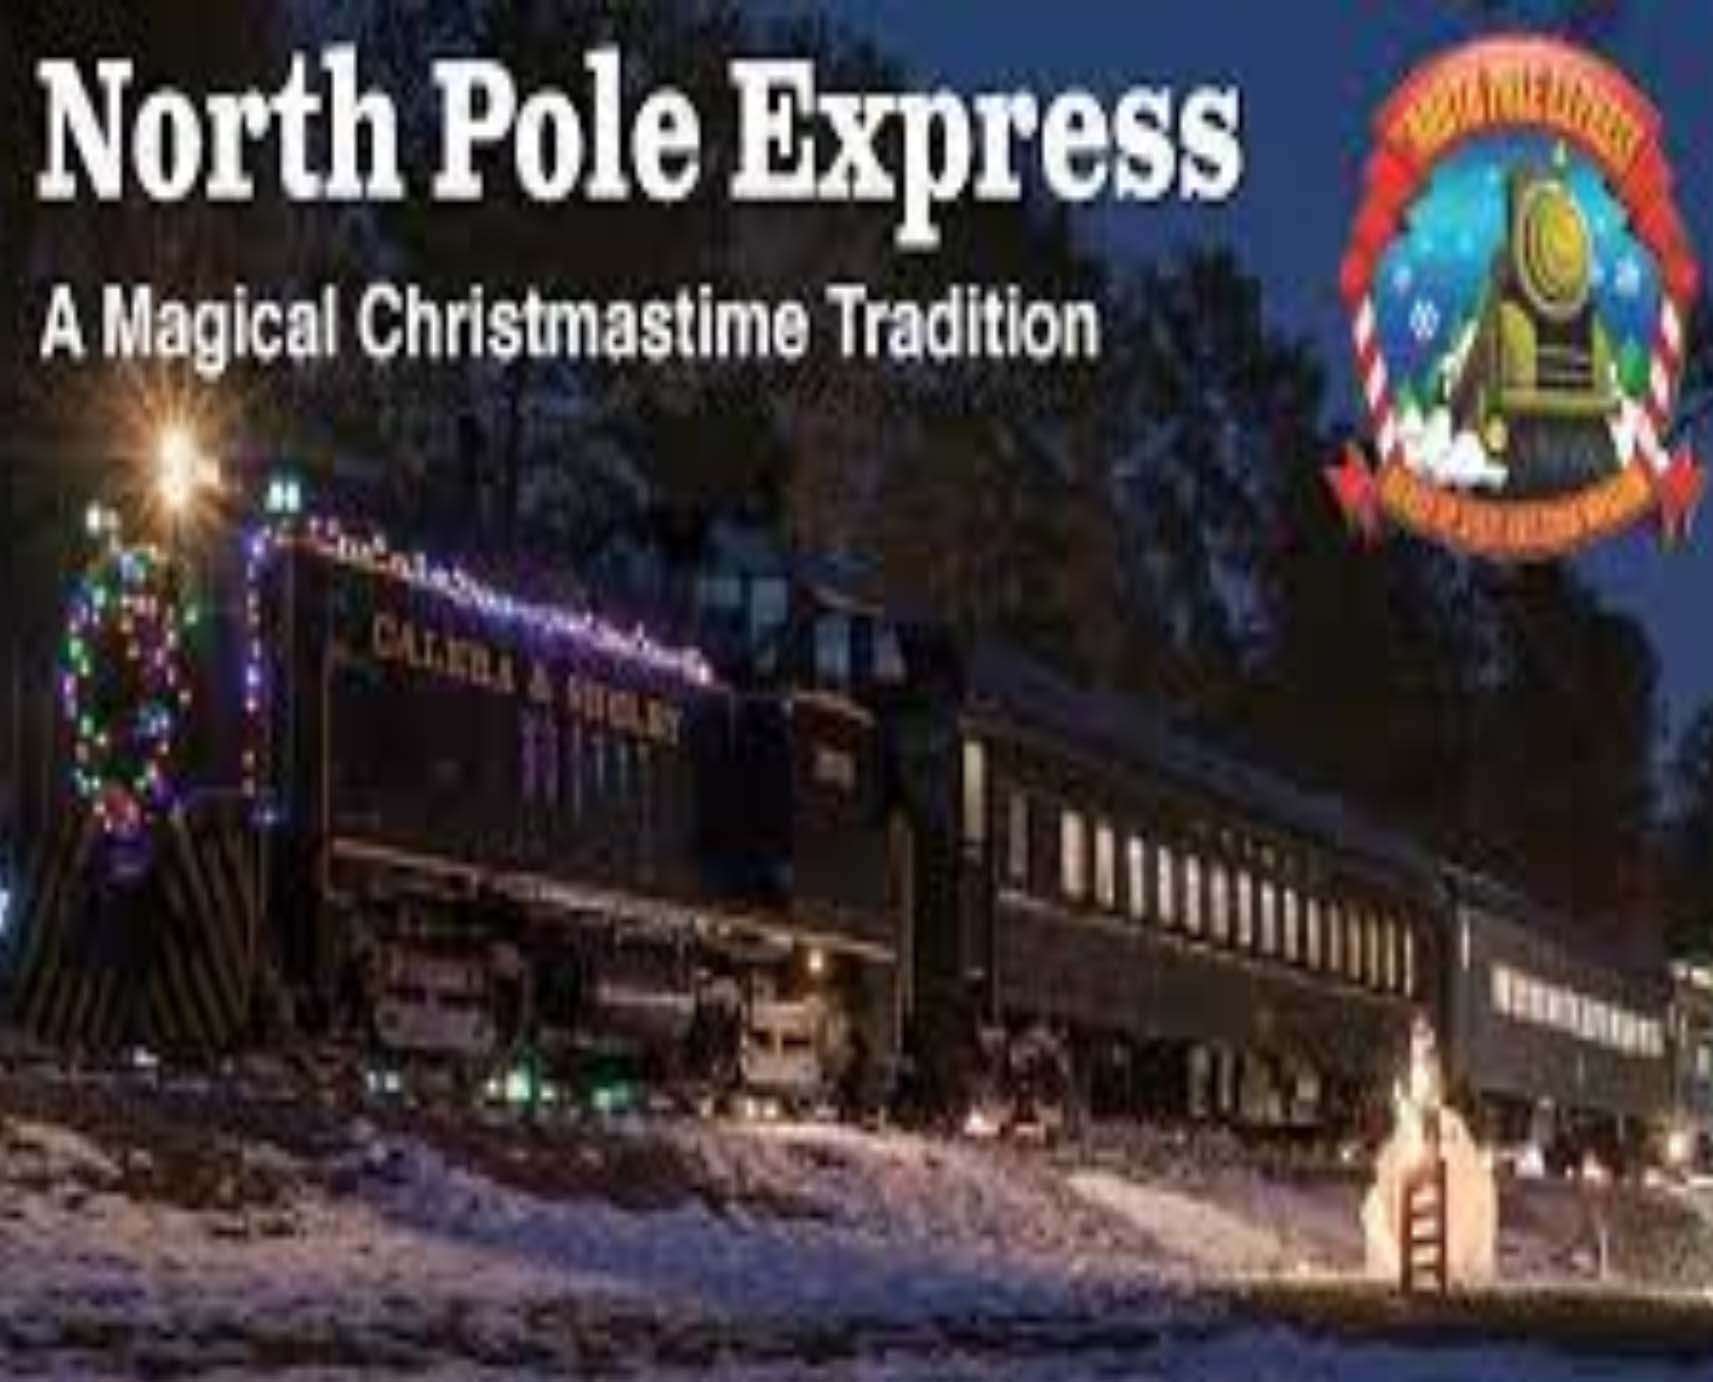 The North Pole Express-A Magical Christmastime Tradition